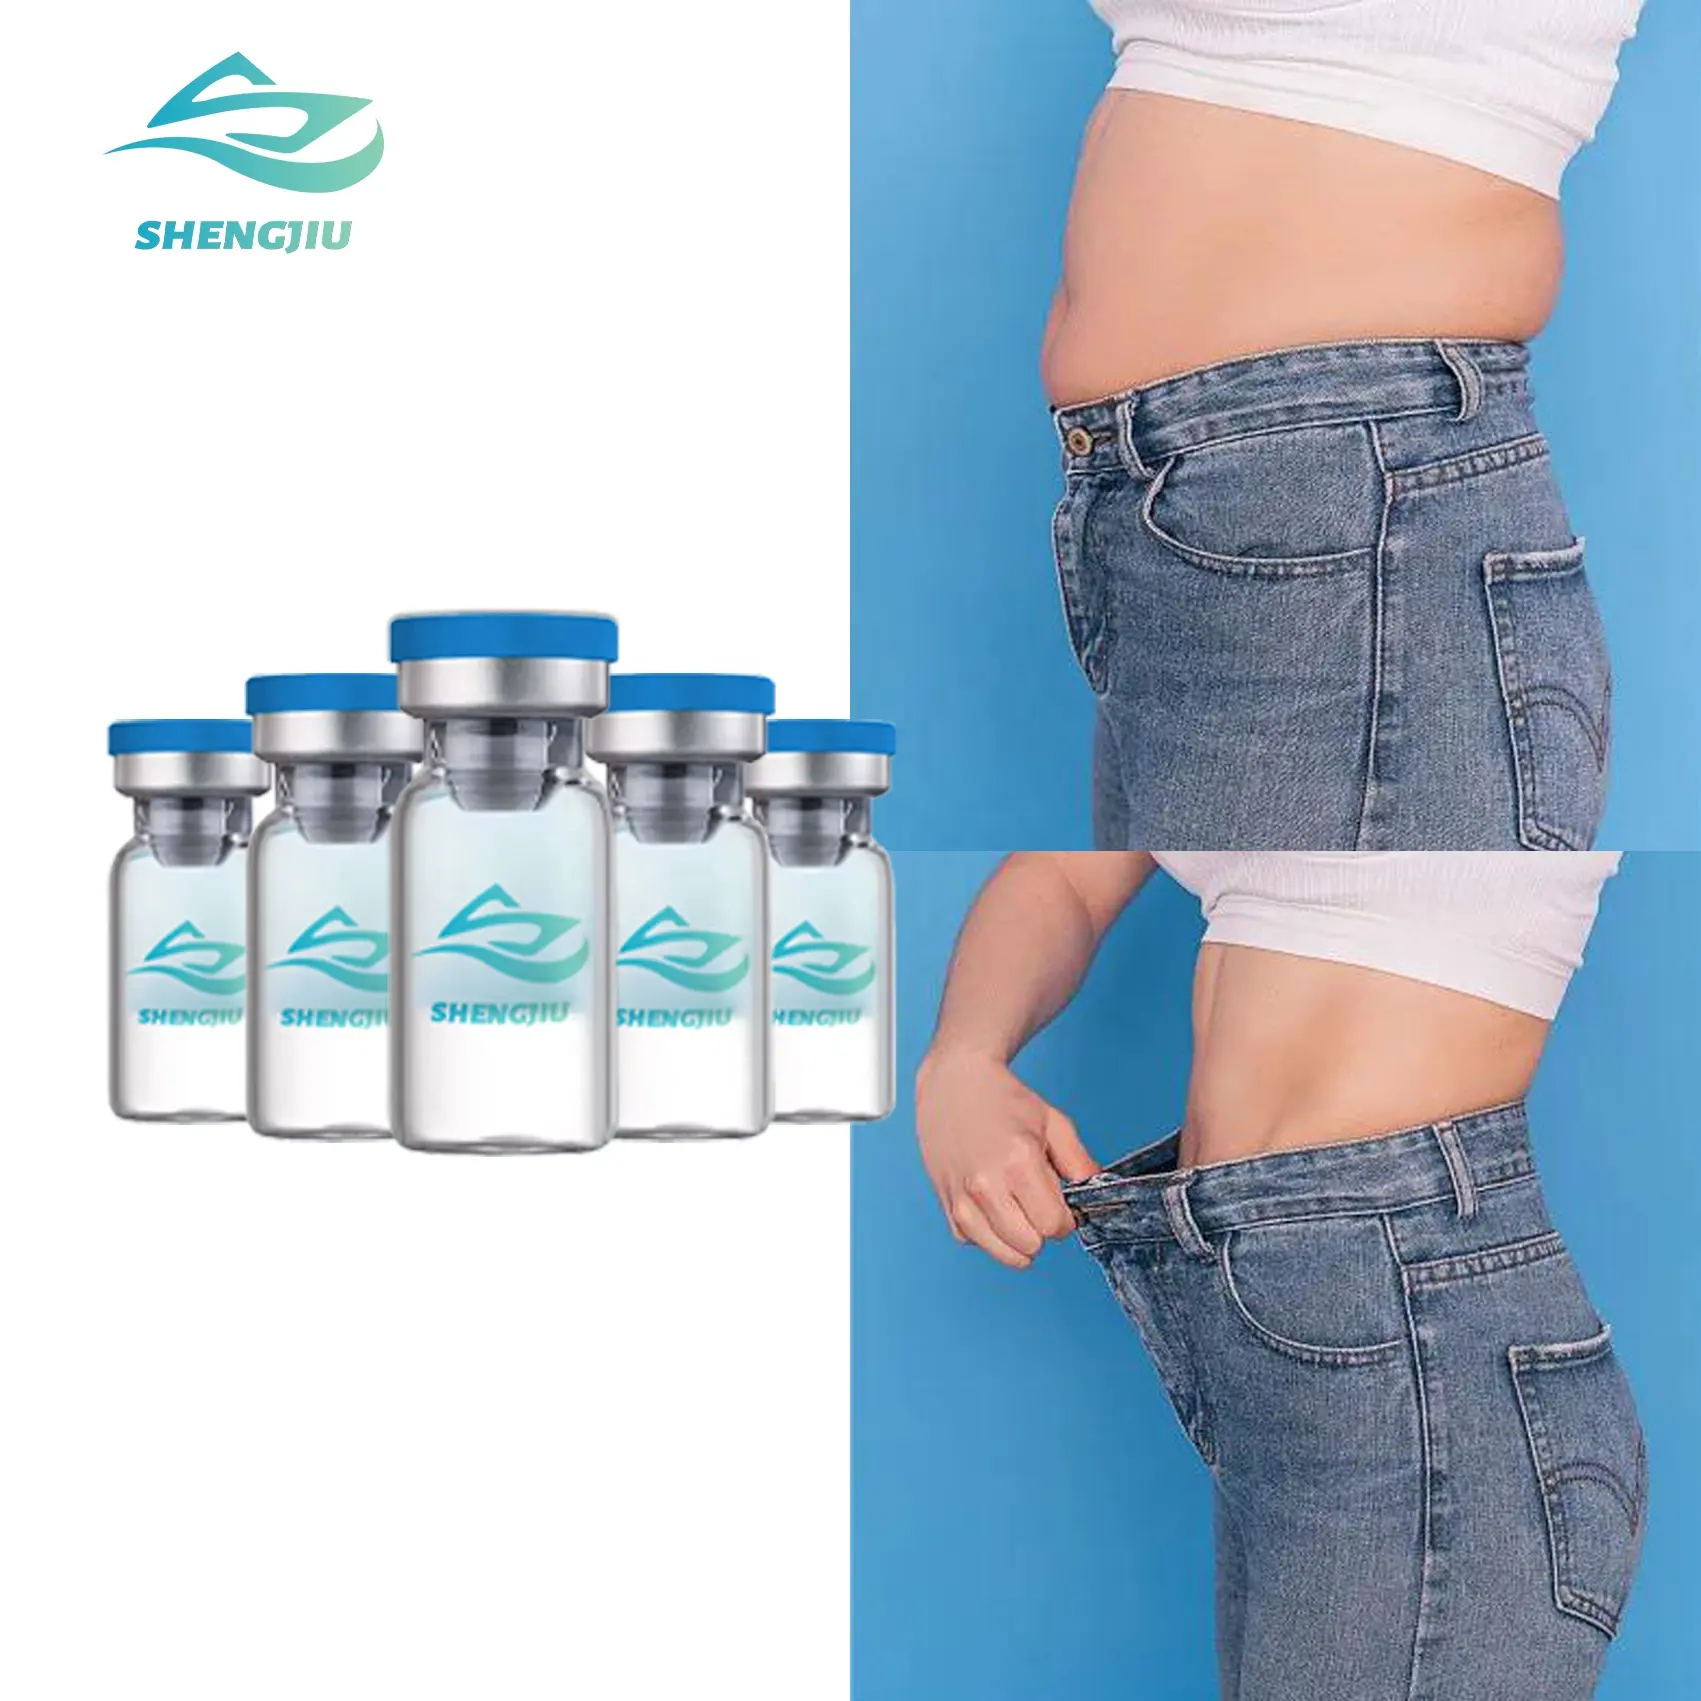 Custom Research Peptides lyophilized Powder and Weight Loss Products